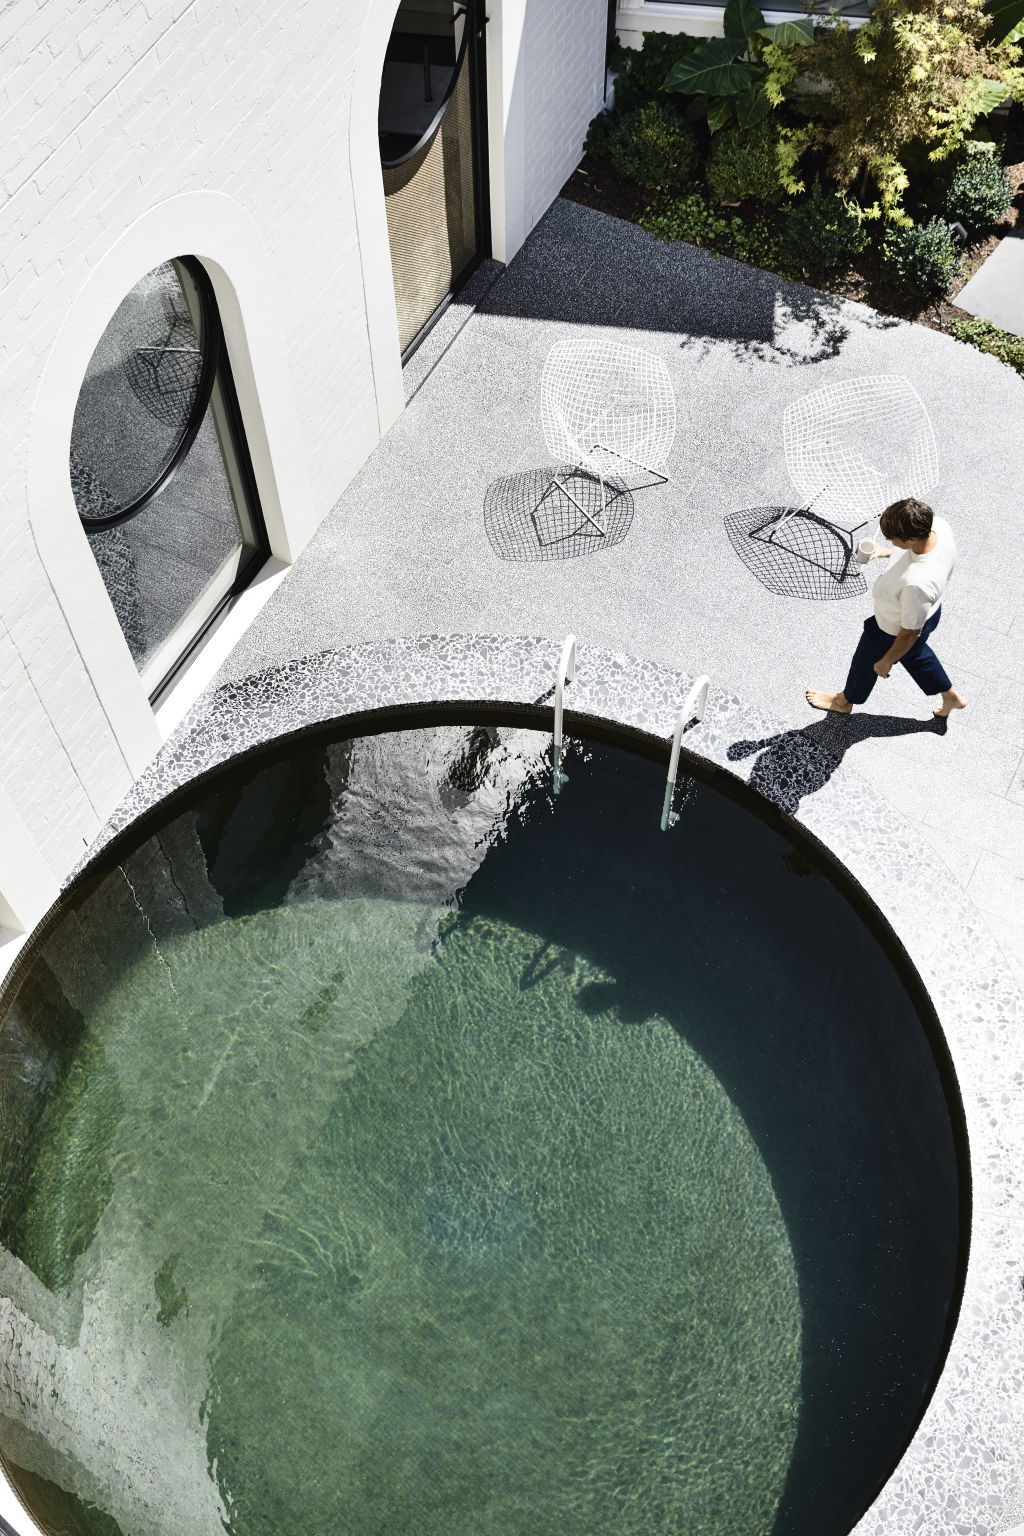 Kennedy Nolan achieved integration of the pool on the property by creating using a circular shape. Photo: Derek Swalwell